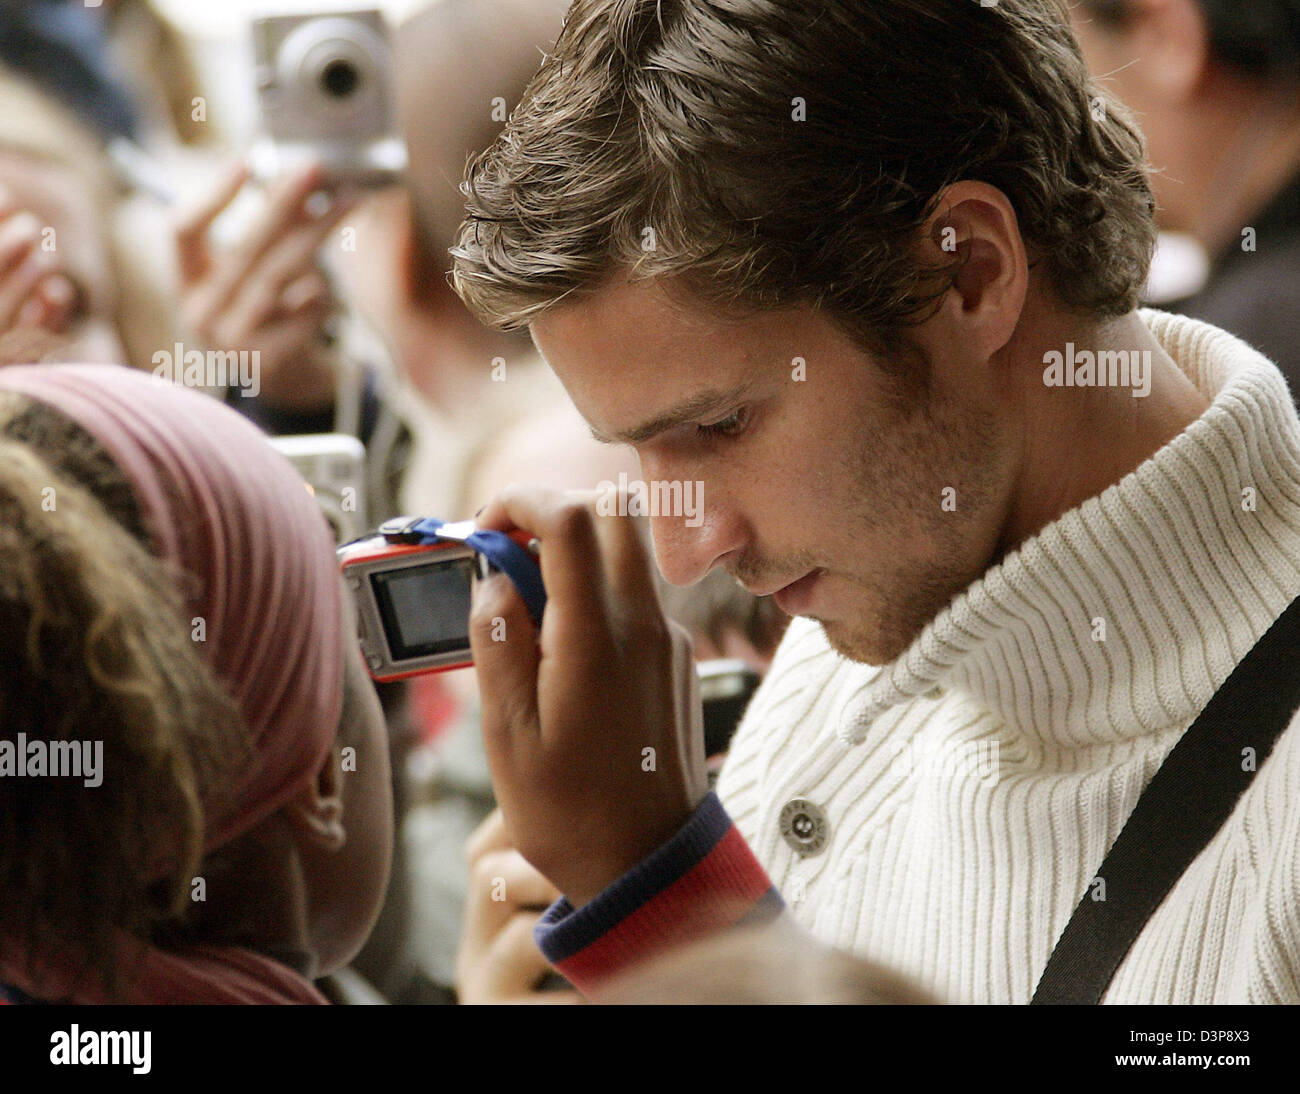 Player of the German national soccer team Arne Friedrich signs autographs prior to the premiere of the film 'Deutschland - Ein Sommermaerchen' ('Germany - A summer dream') at the Berlinale film palace in Berlin, Germany,  Tuesday, 03 October 2006. The film recalls the story of the German soccer national team during the 2006 FIFA World Cup. The film will be shown in German cinemas s Stock Photo